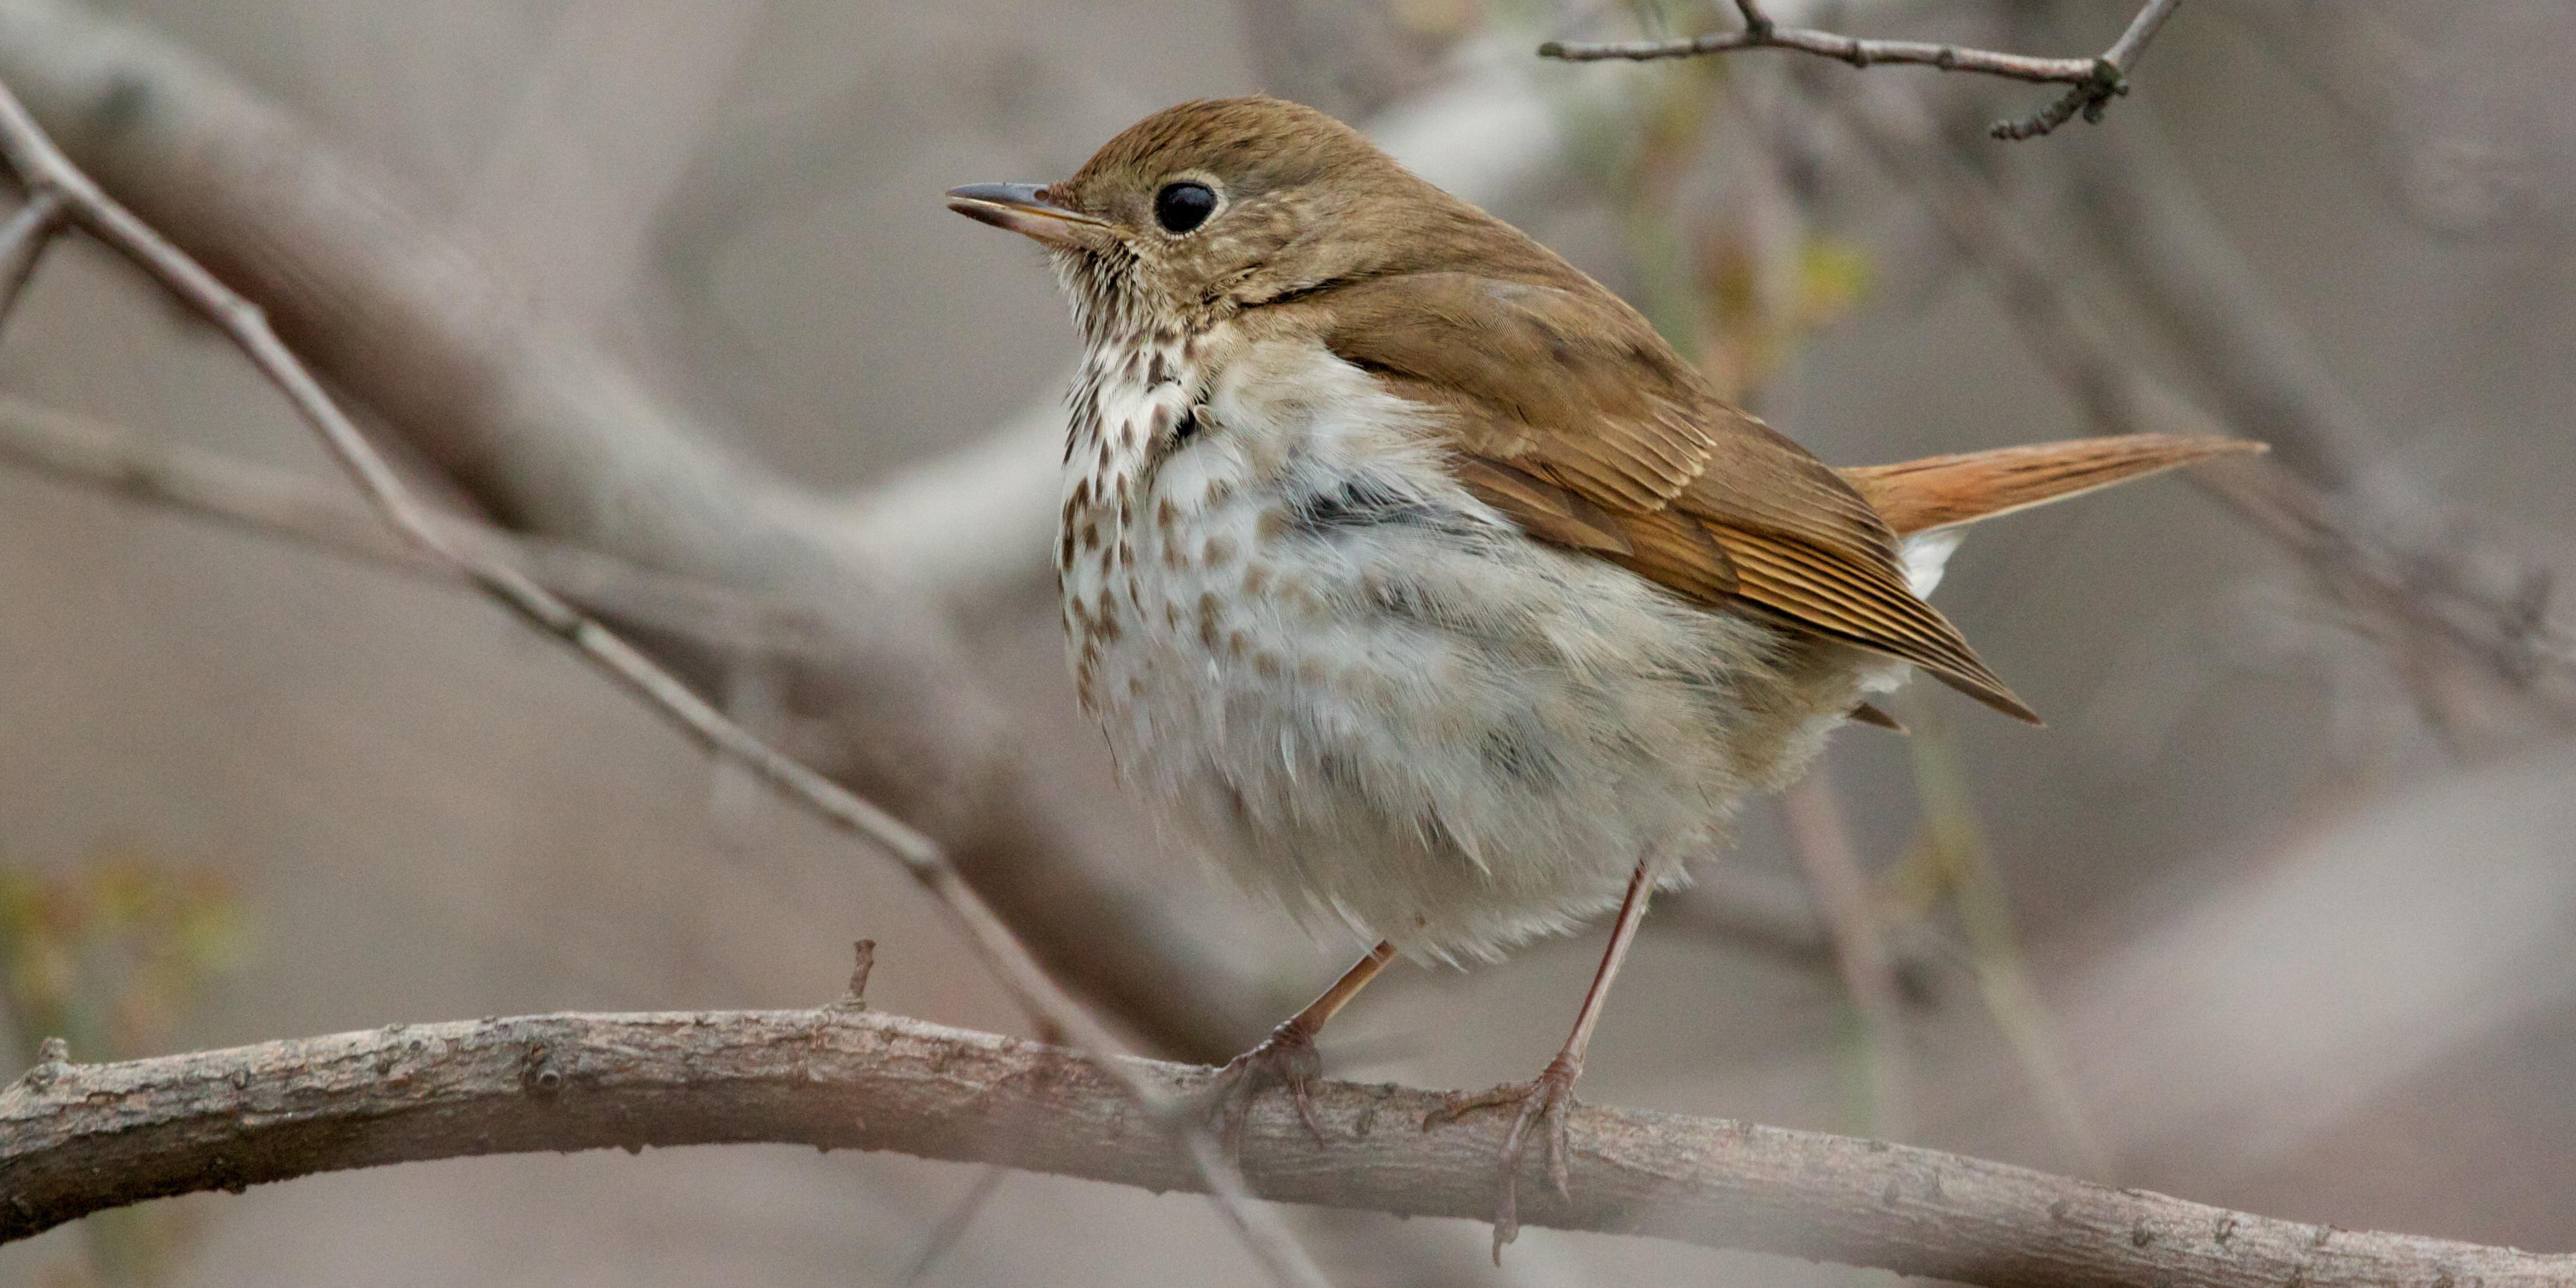 Hermit Thrush photo and wallpaper. Collection